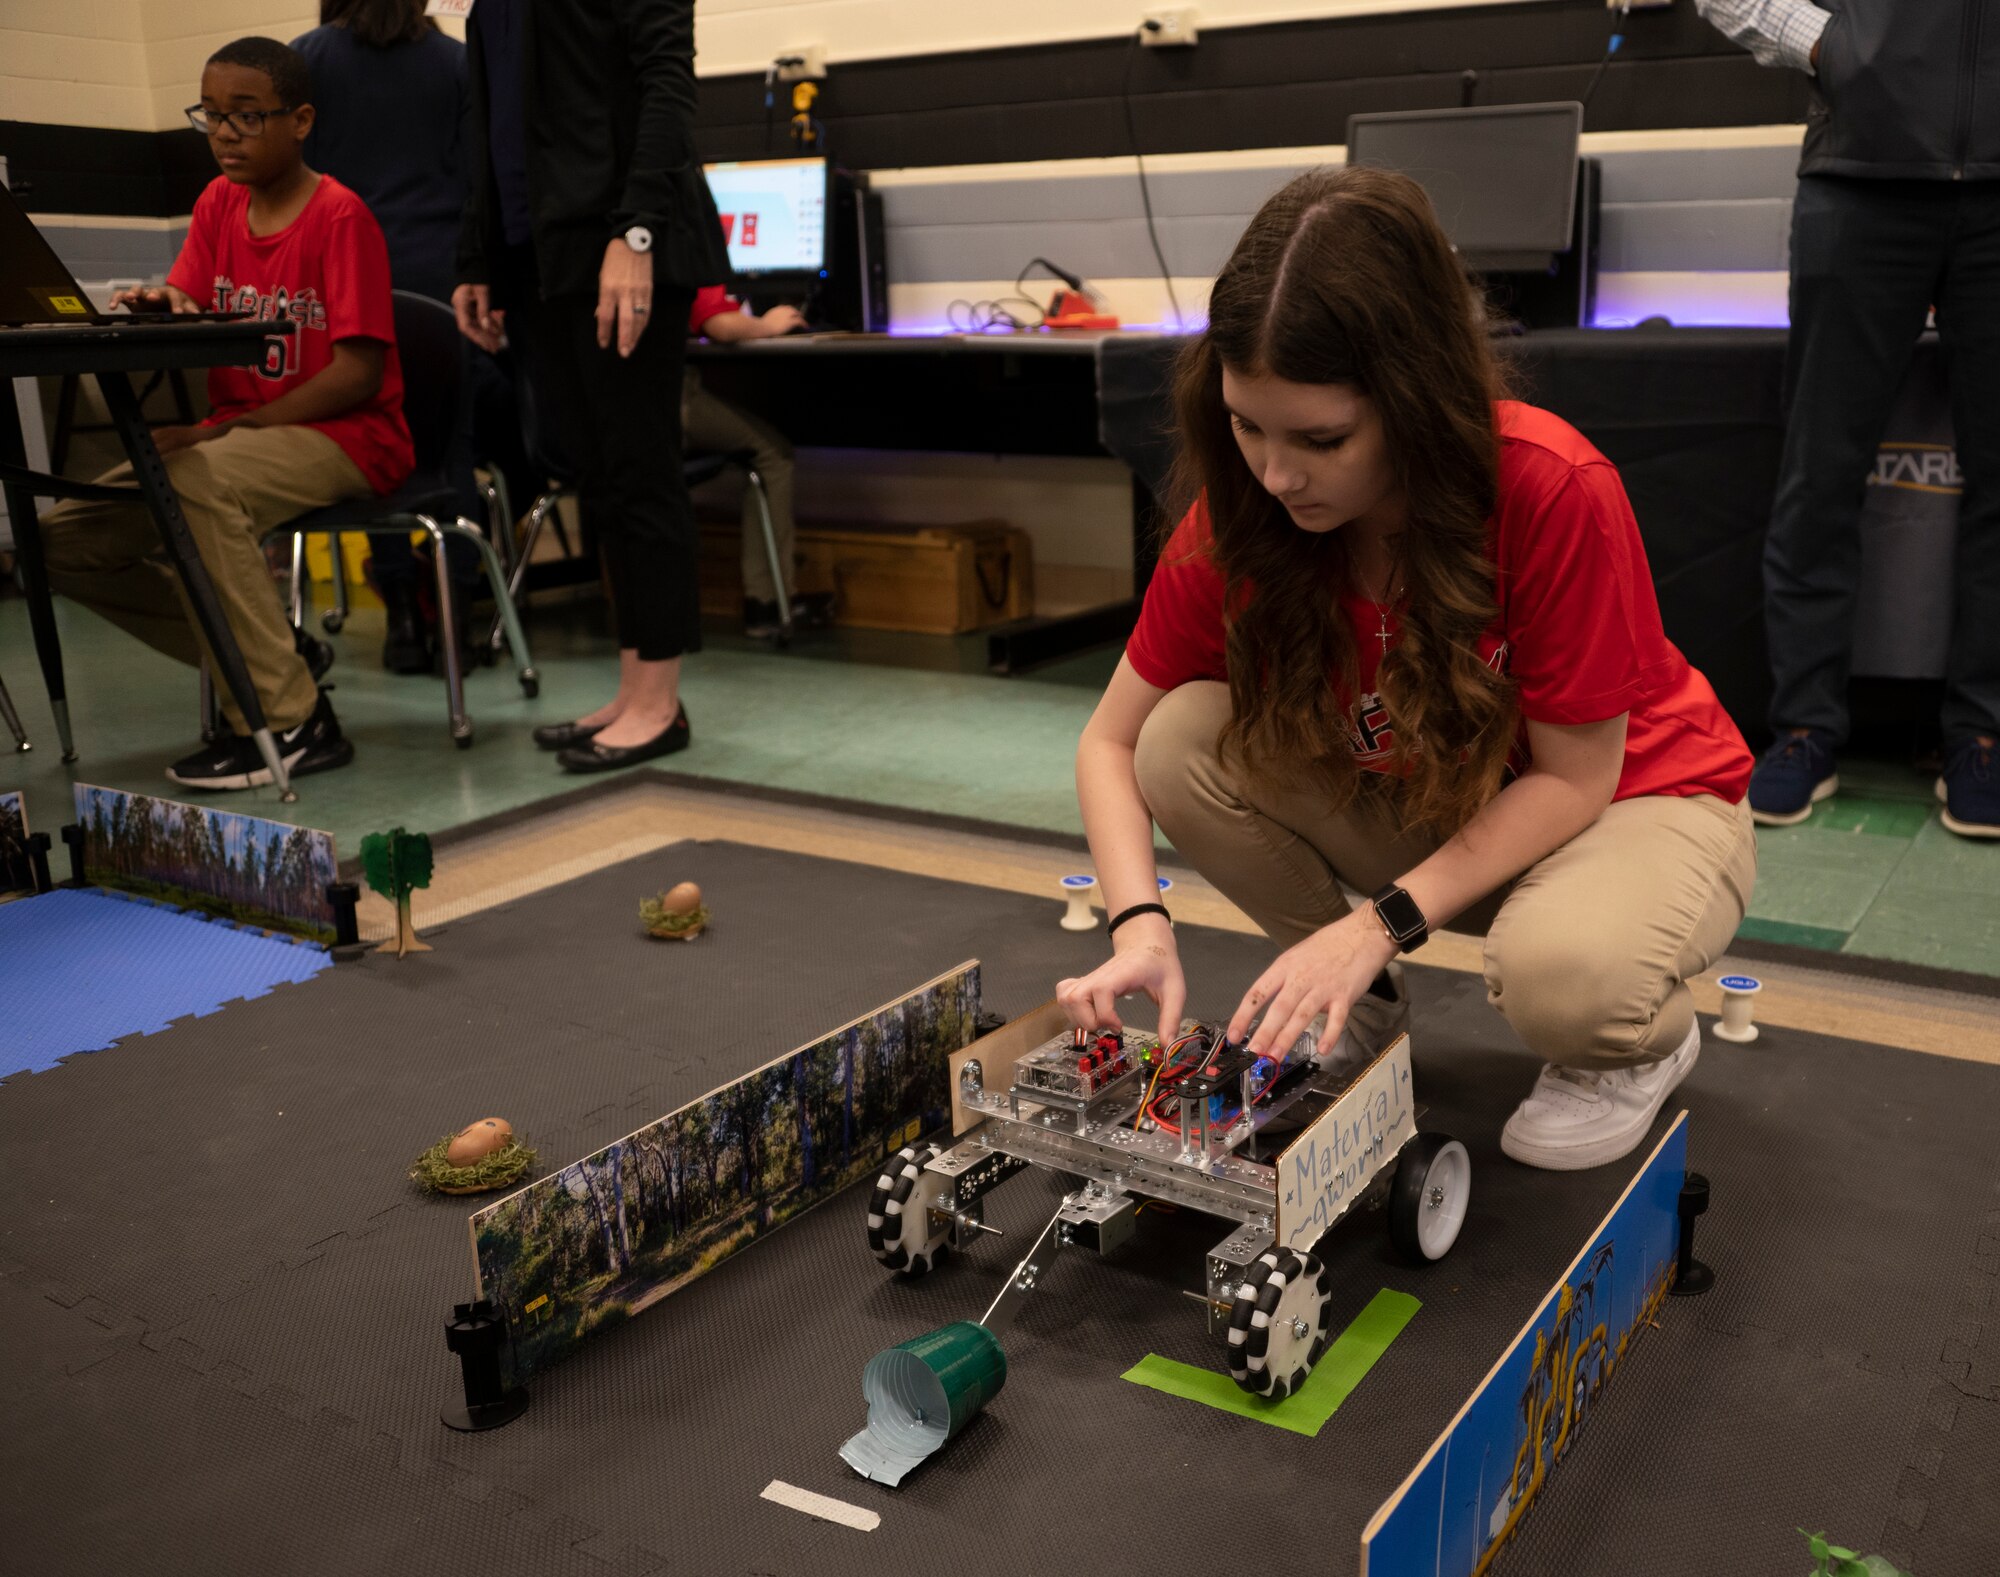 Girl placing robot on the ground.